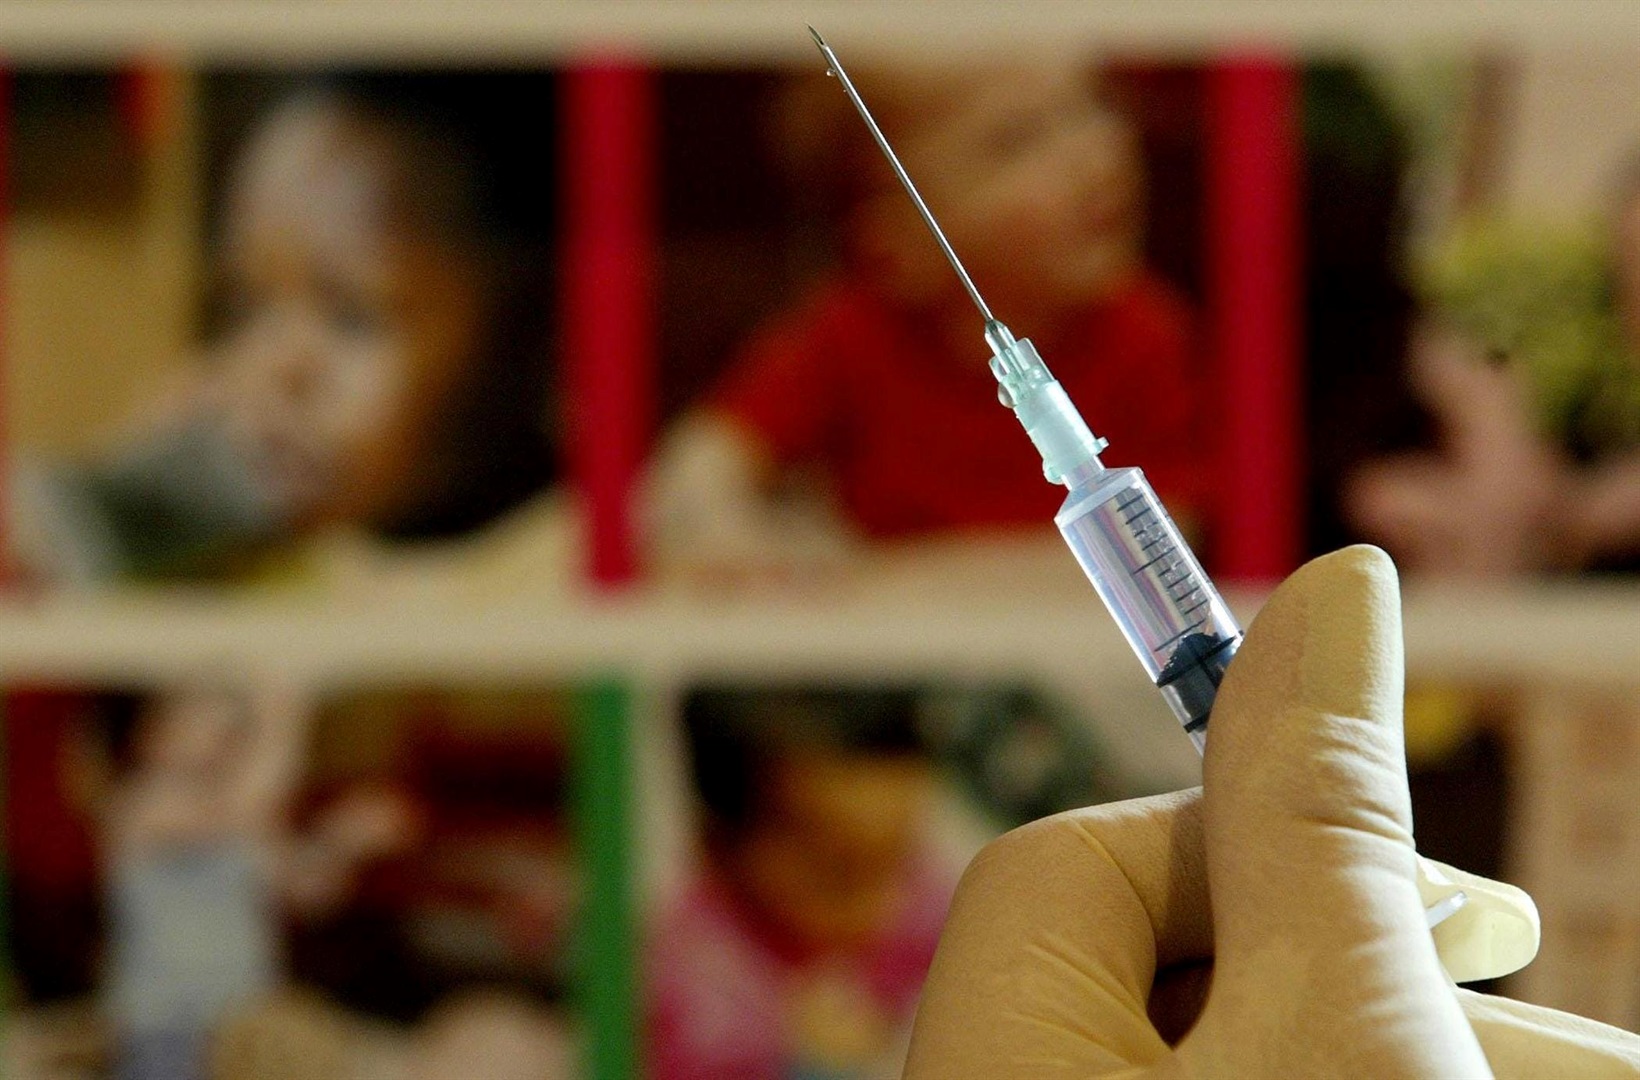 According to ARCC, vaccination remains the only way to ensure that polio does not take hold in Africa.